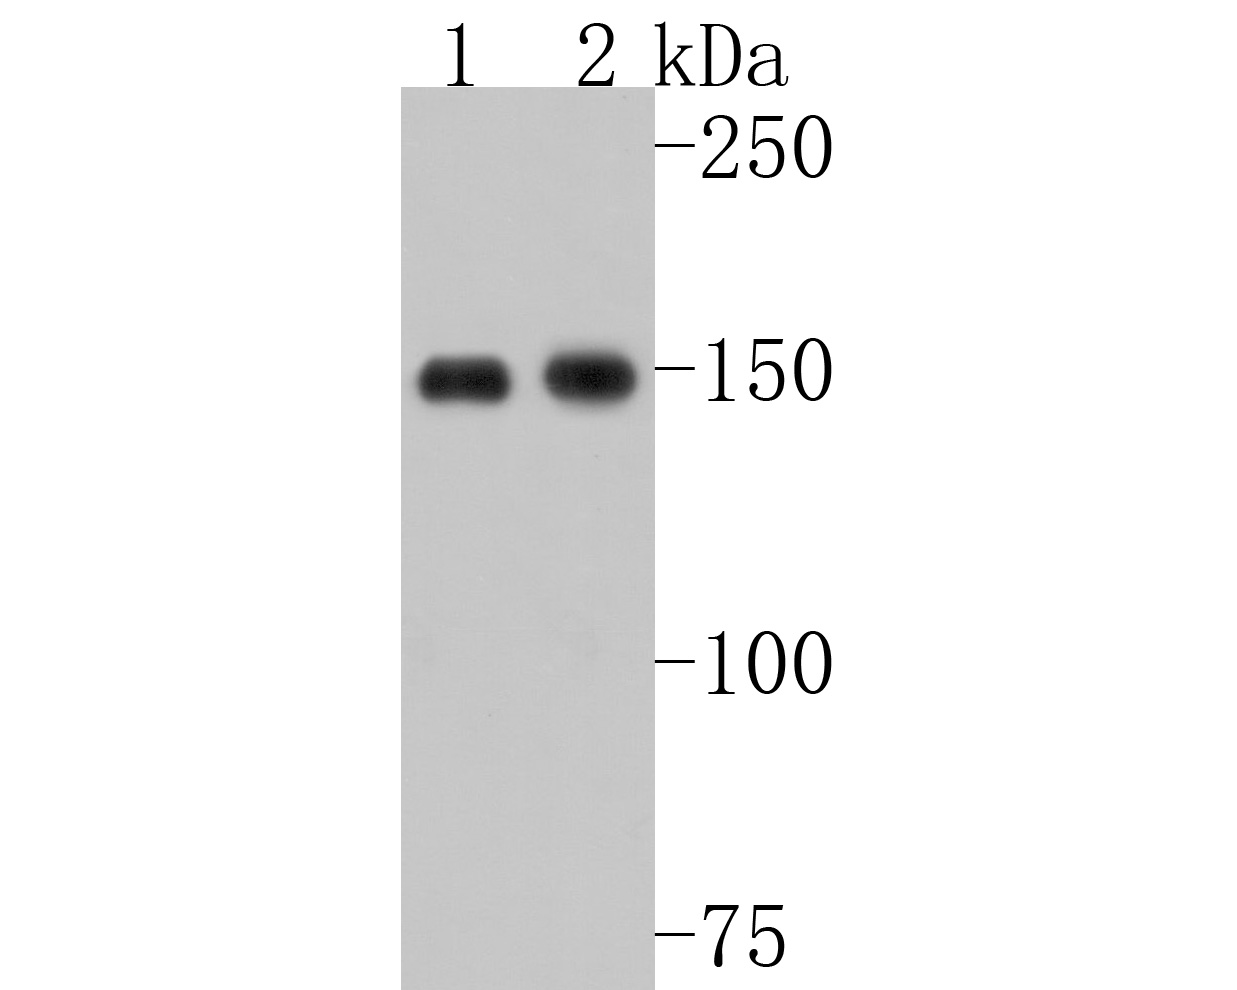 Western blot analysis of ASPP2 on different lysates. Proteins were transferred to a PVDF membrane and blocked with 5% BSA in PBS for 1 hour at room temperature. The primary antibody (ET1702-79, 1/500) was used in 5% BSA at room temperature for 2 hours. Goat Anti-Rabbit IgG - HRP Secondary Antibody (HA1001) at 1:200,000 dilution was used for 1 hour at room temperature.<br />
Positive control: <br />
Lane 1: Hela cell lysate<br />
Lane 2: MCF-7 cell lysate